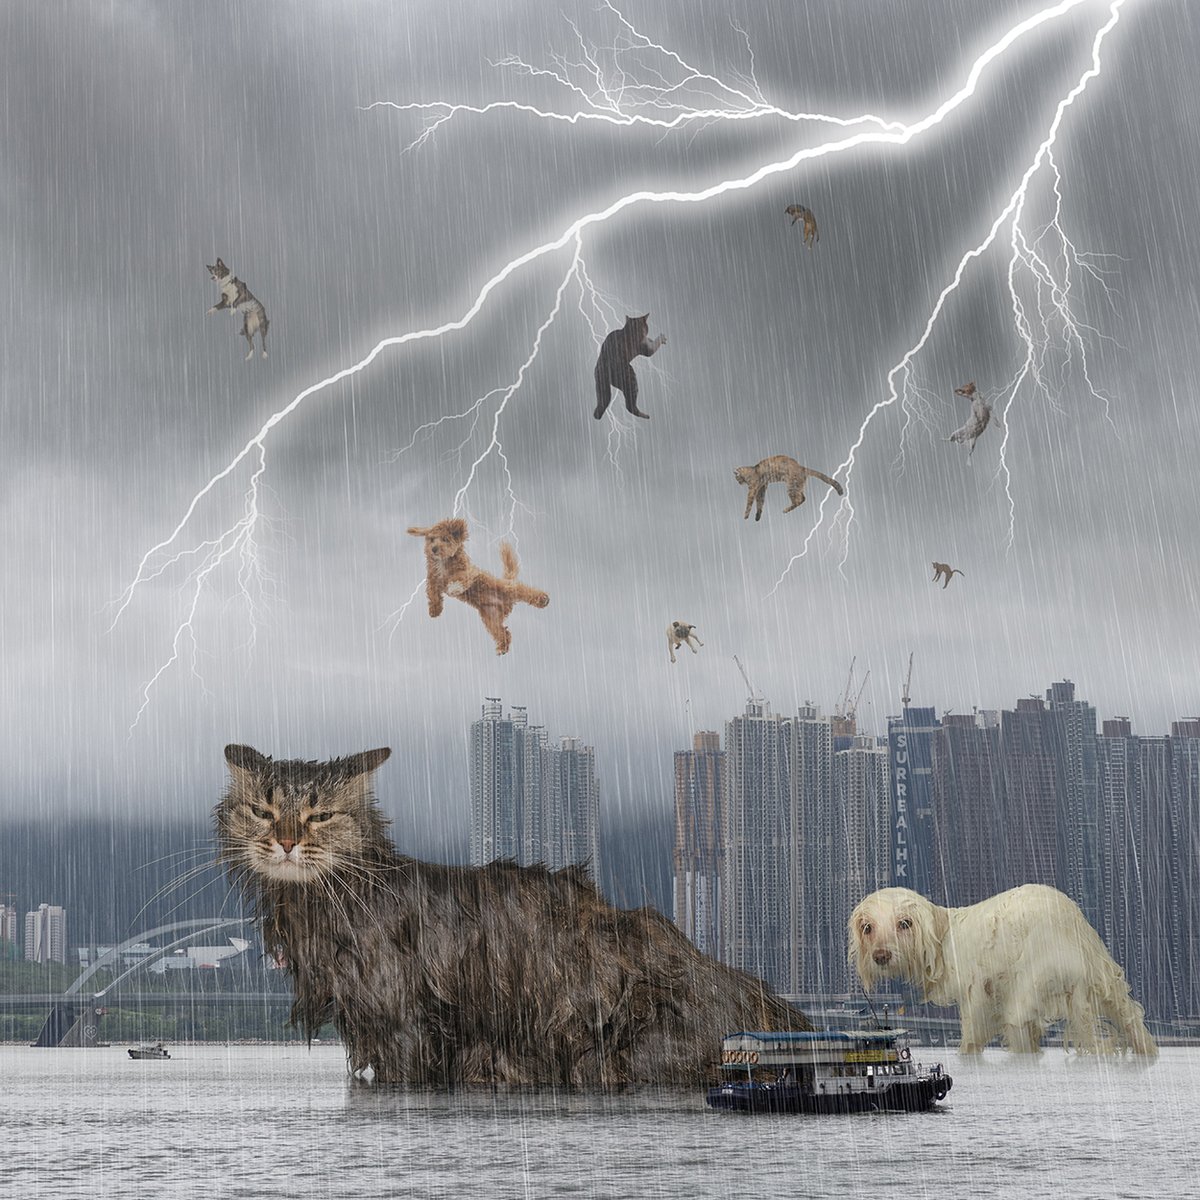 It's raining cats and dogs!
落貓落狗!

(No animals were harmed in the making of this artwork)

#RainingCatsAndDogs #Rain #Pouring #紅雨
#cats #dogs #kitty 
#p圖 
#Photoshop 
#MadeWithPhotoshop 
#PhotoManipulation 
#NotAI 
#HongKong 
#surrealhk